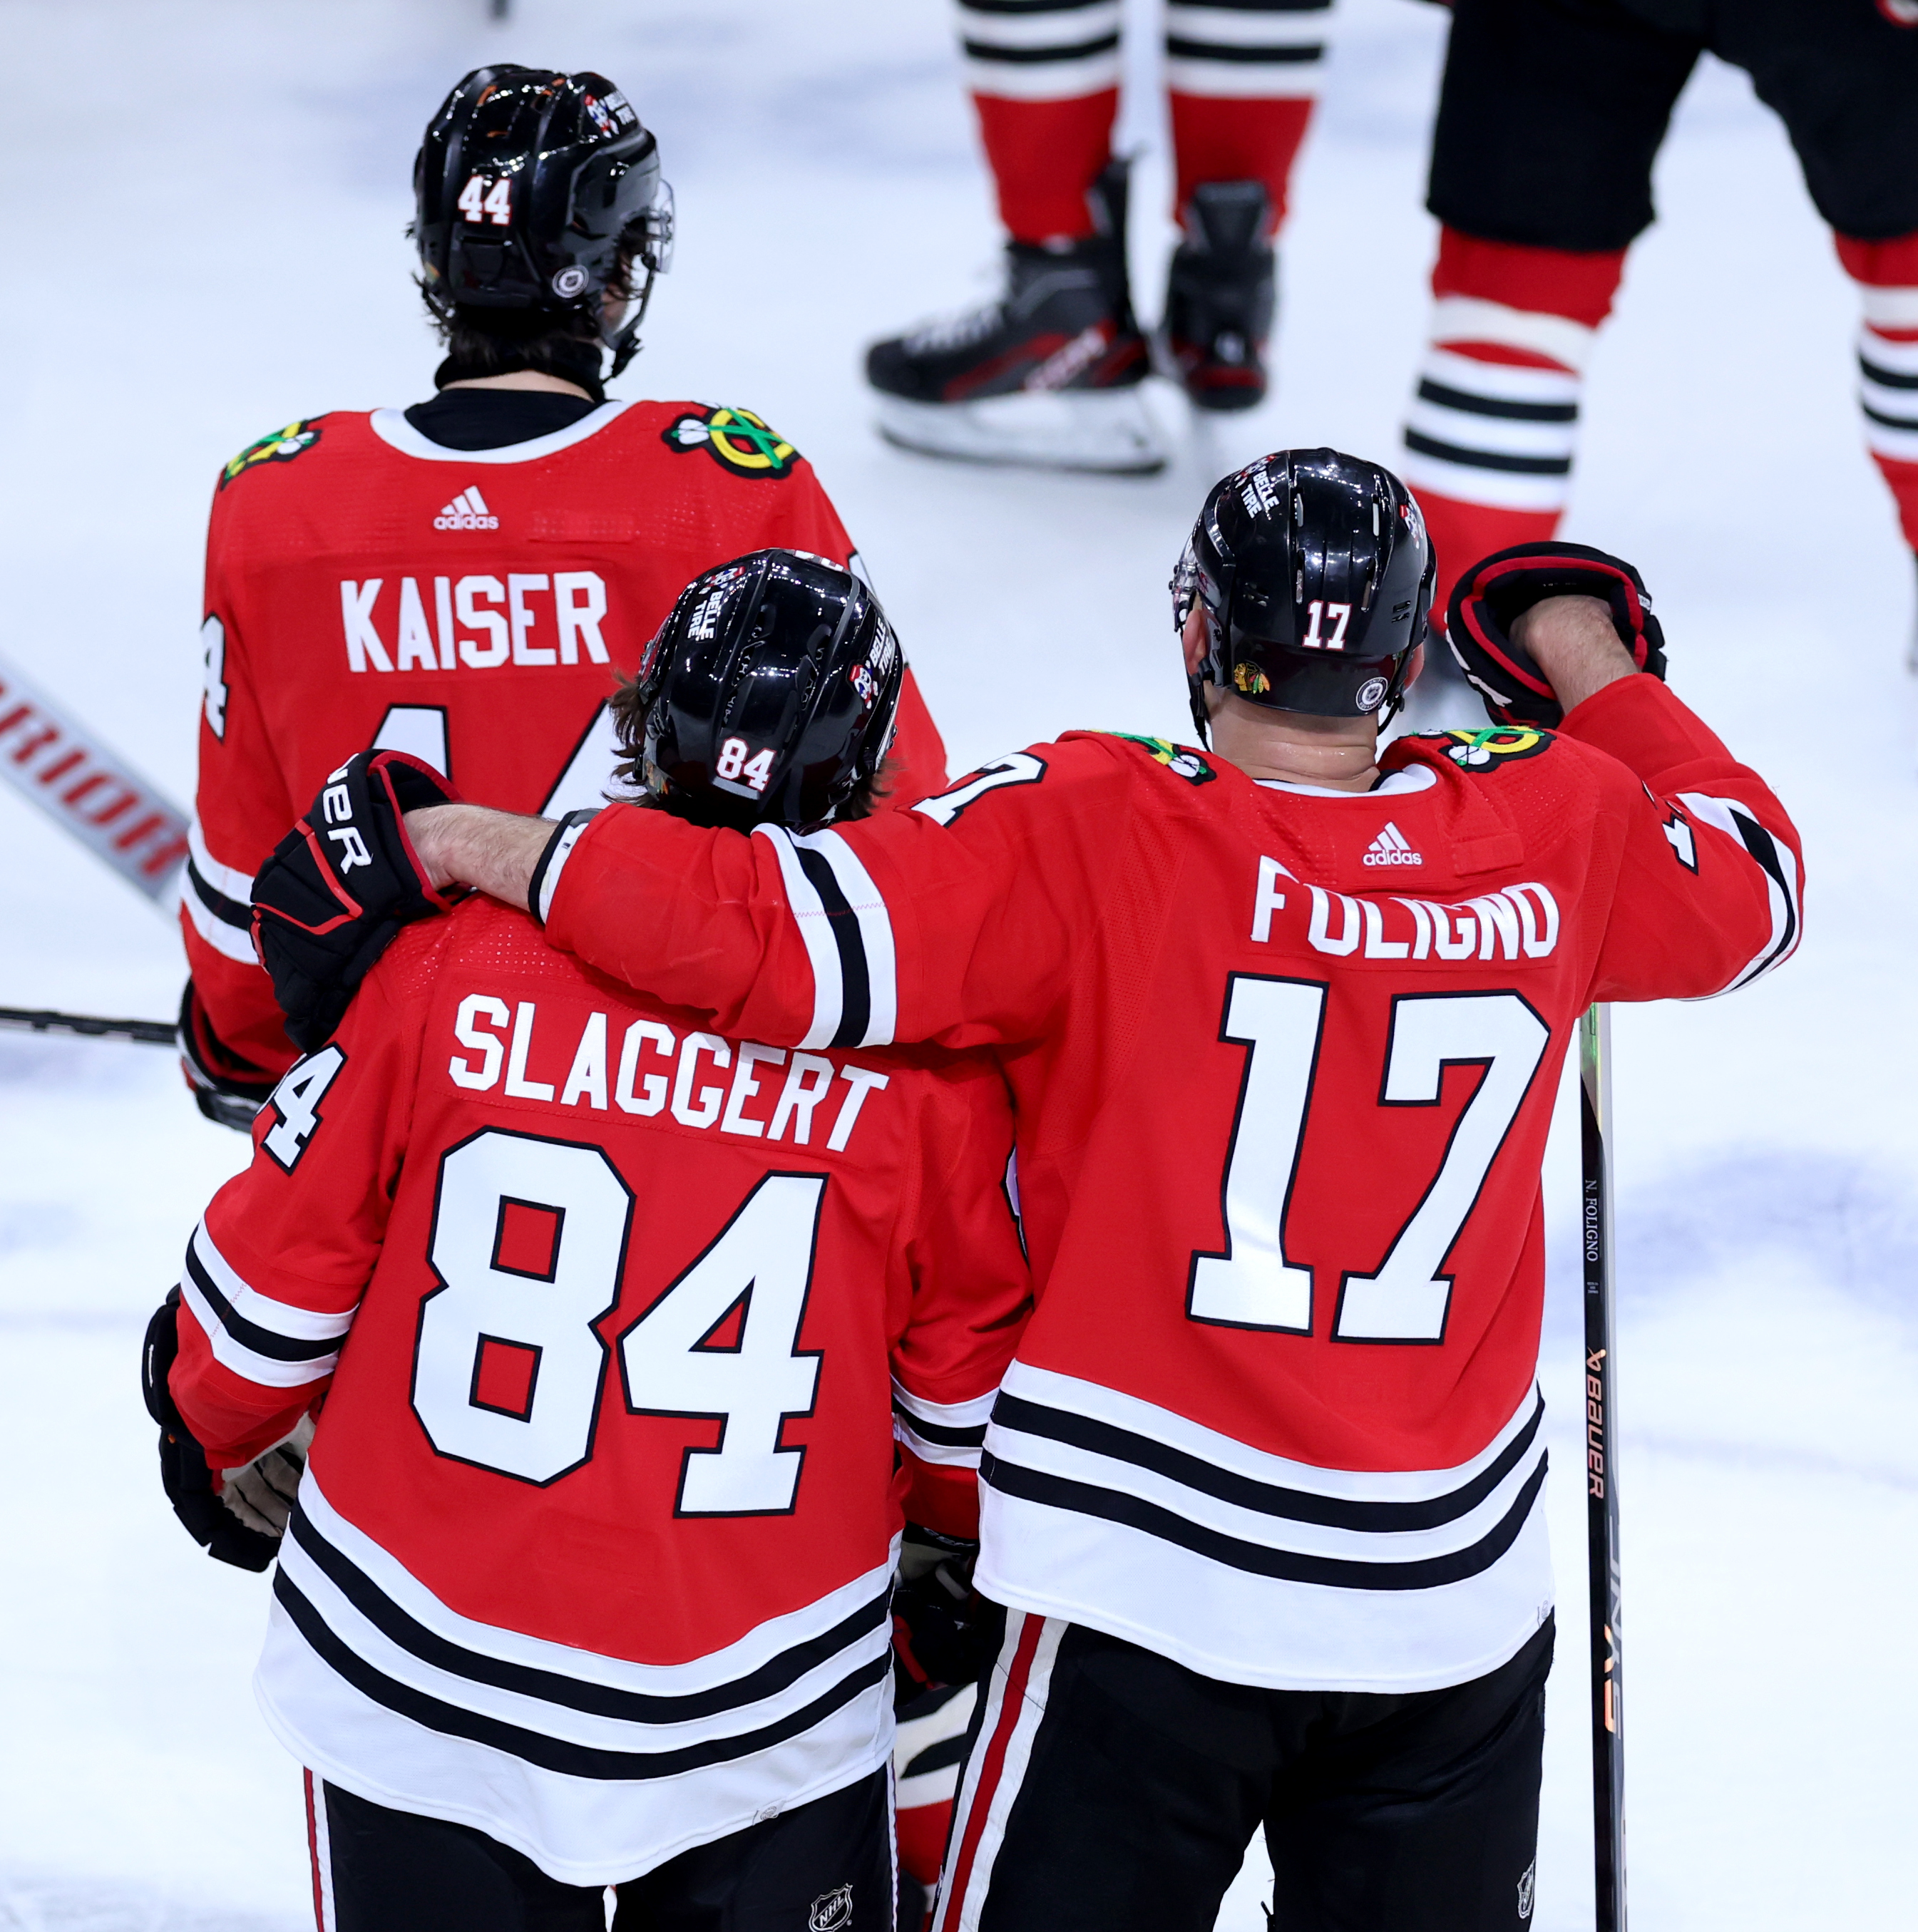 Chicago Blackhawks left wing Nick Foligno (17) puts his arm around teammate Landon Slaggert (84) after a Blackhawks victory over the Calgary Flames at the United Center in Chicago on March 26, 2024. (Chris Sweda/Chicago Tribune)